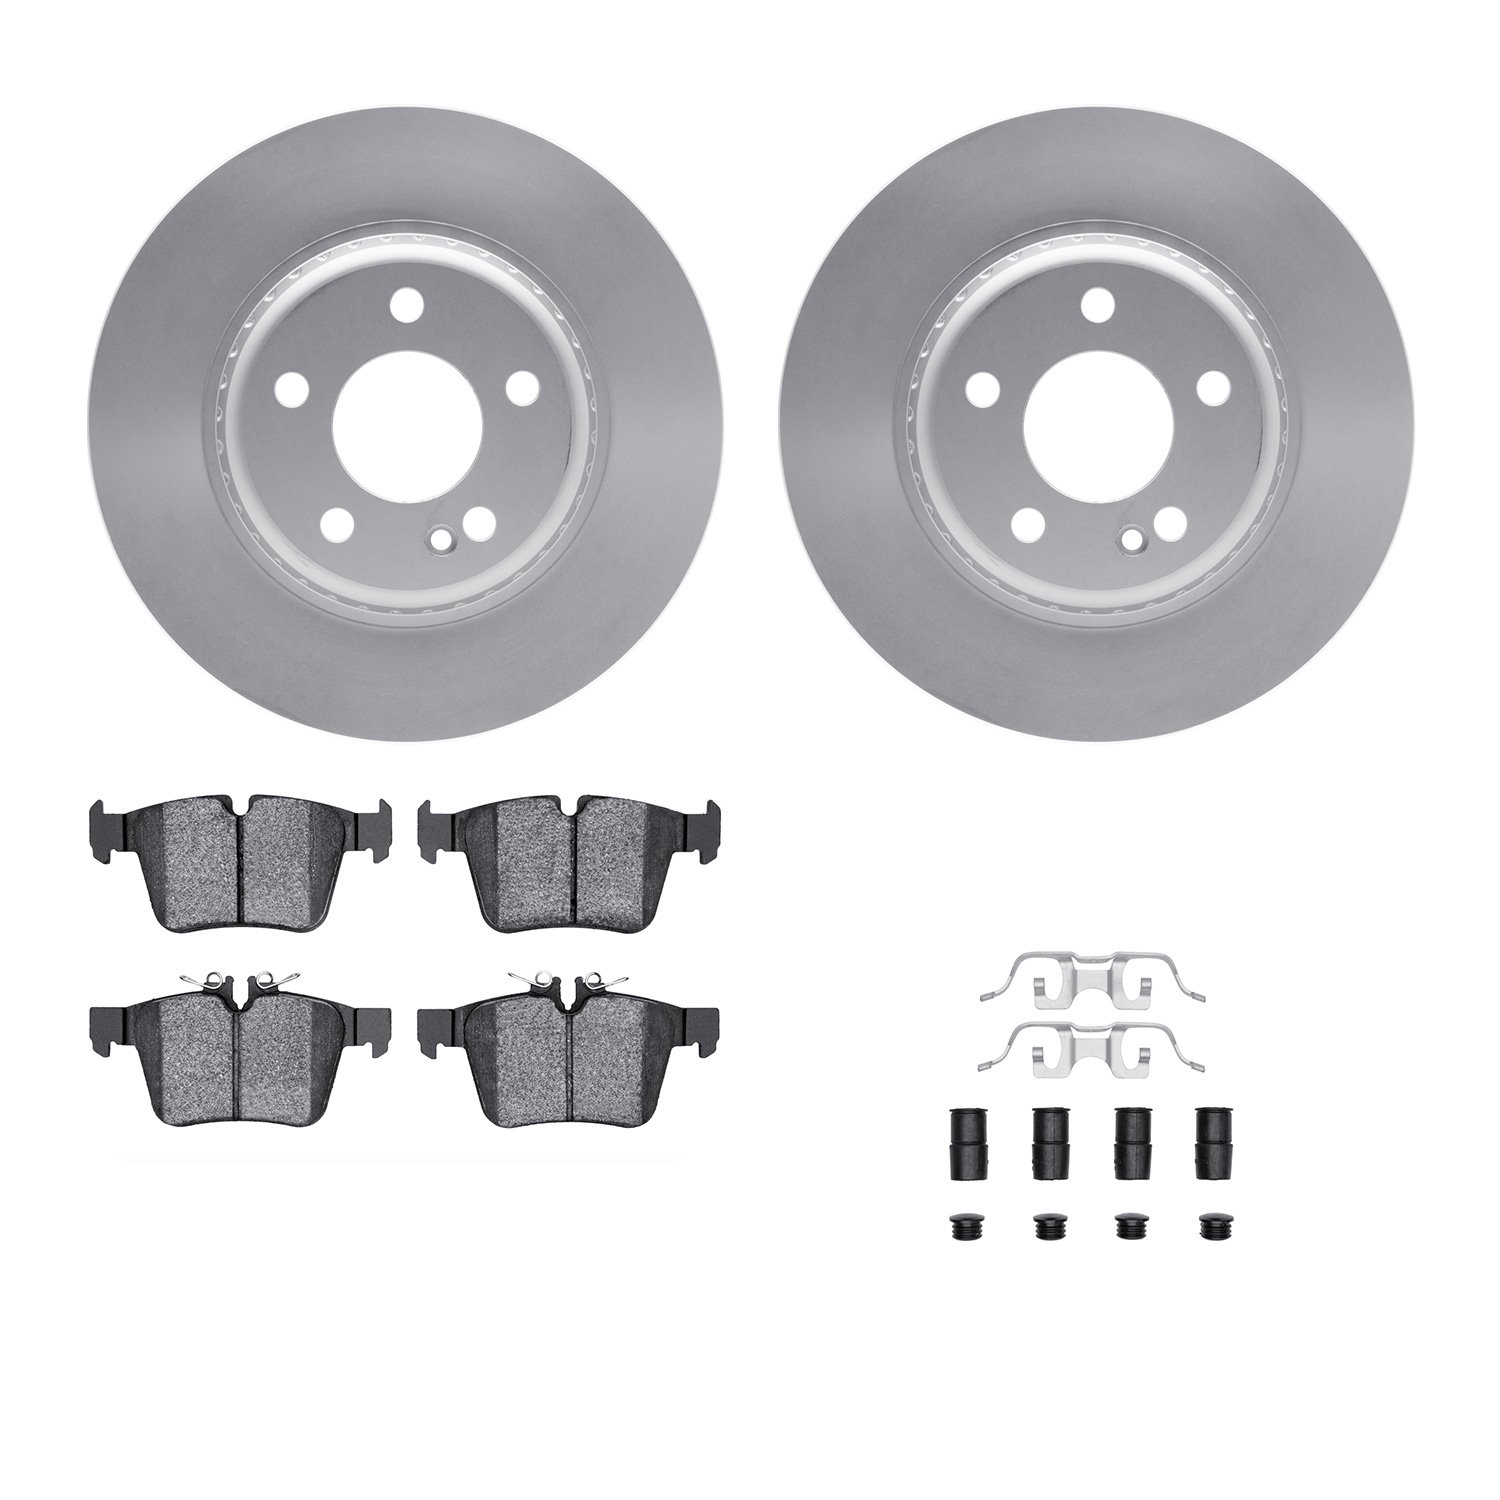 4312-63079 Geospec Brake Rotors with 3000-Series Ceramic Brake Pads & Hardware, Fits Select Mercedes-Benz, Position: Rear